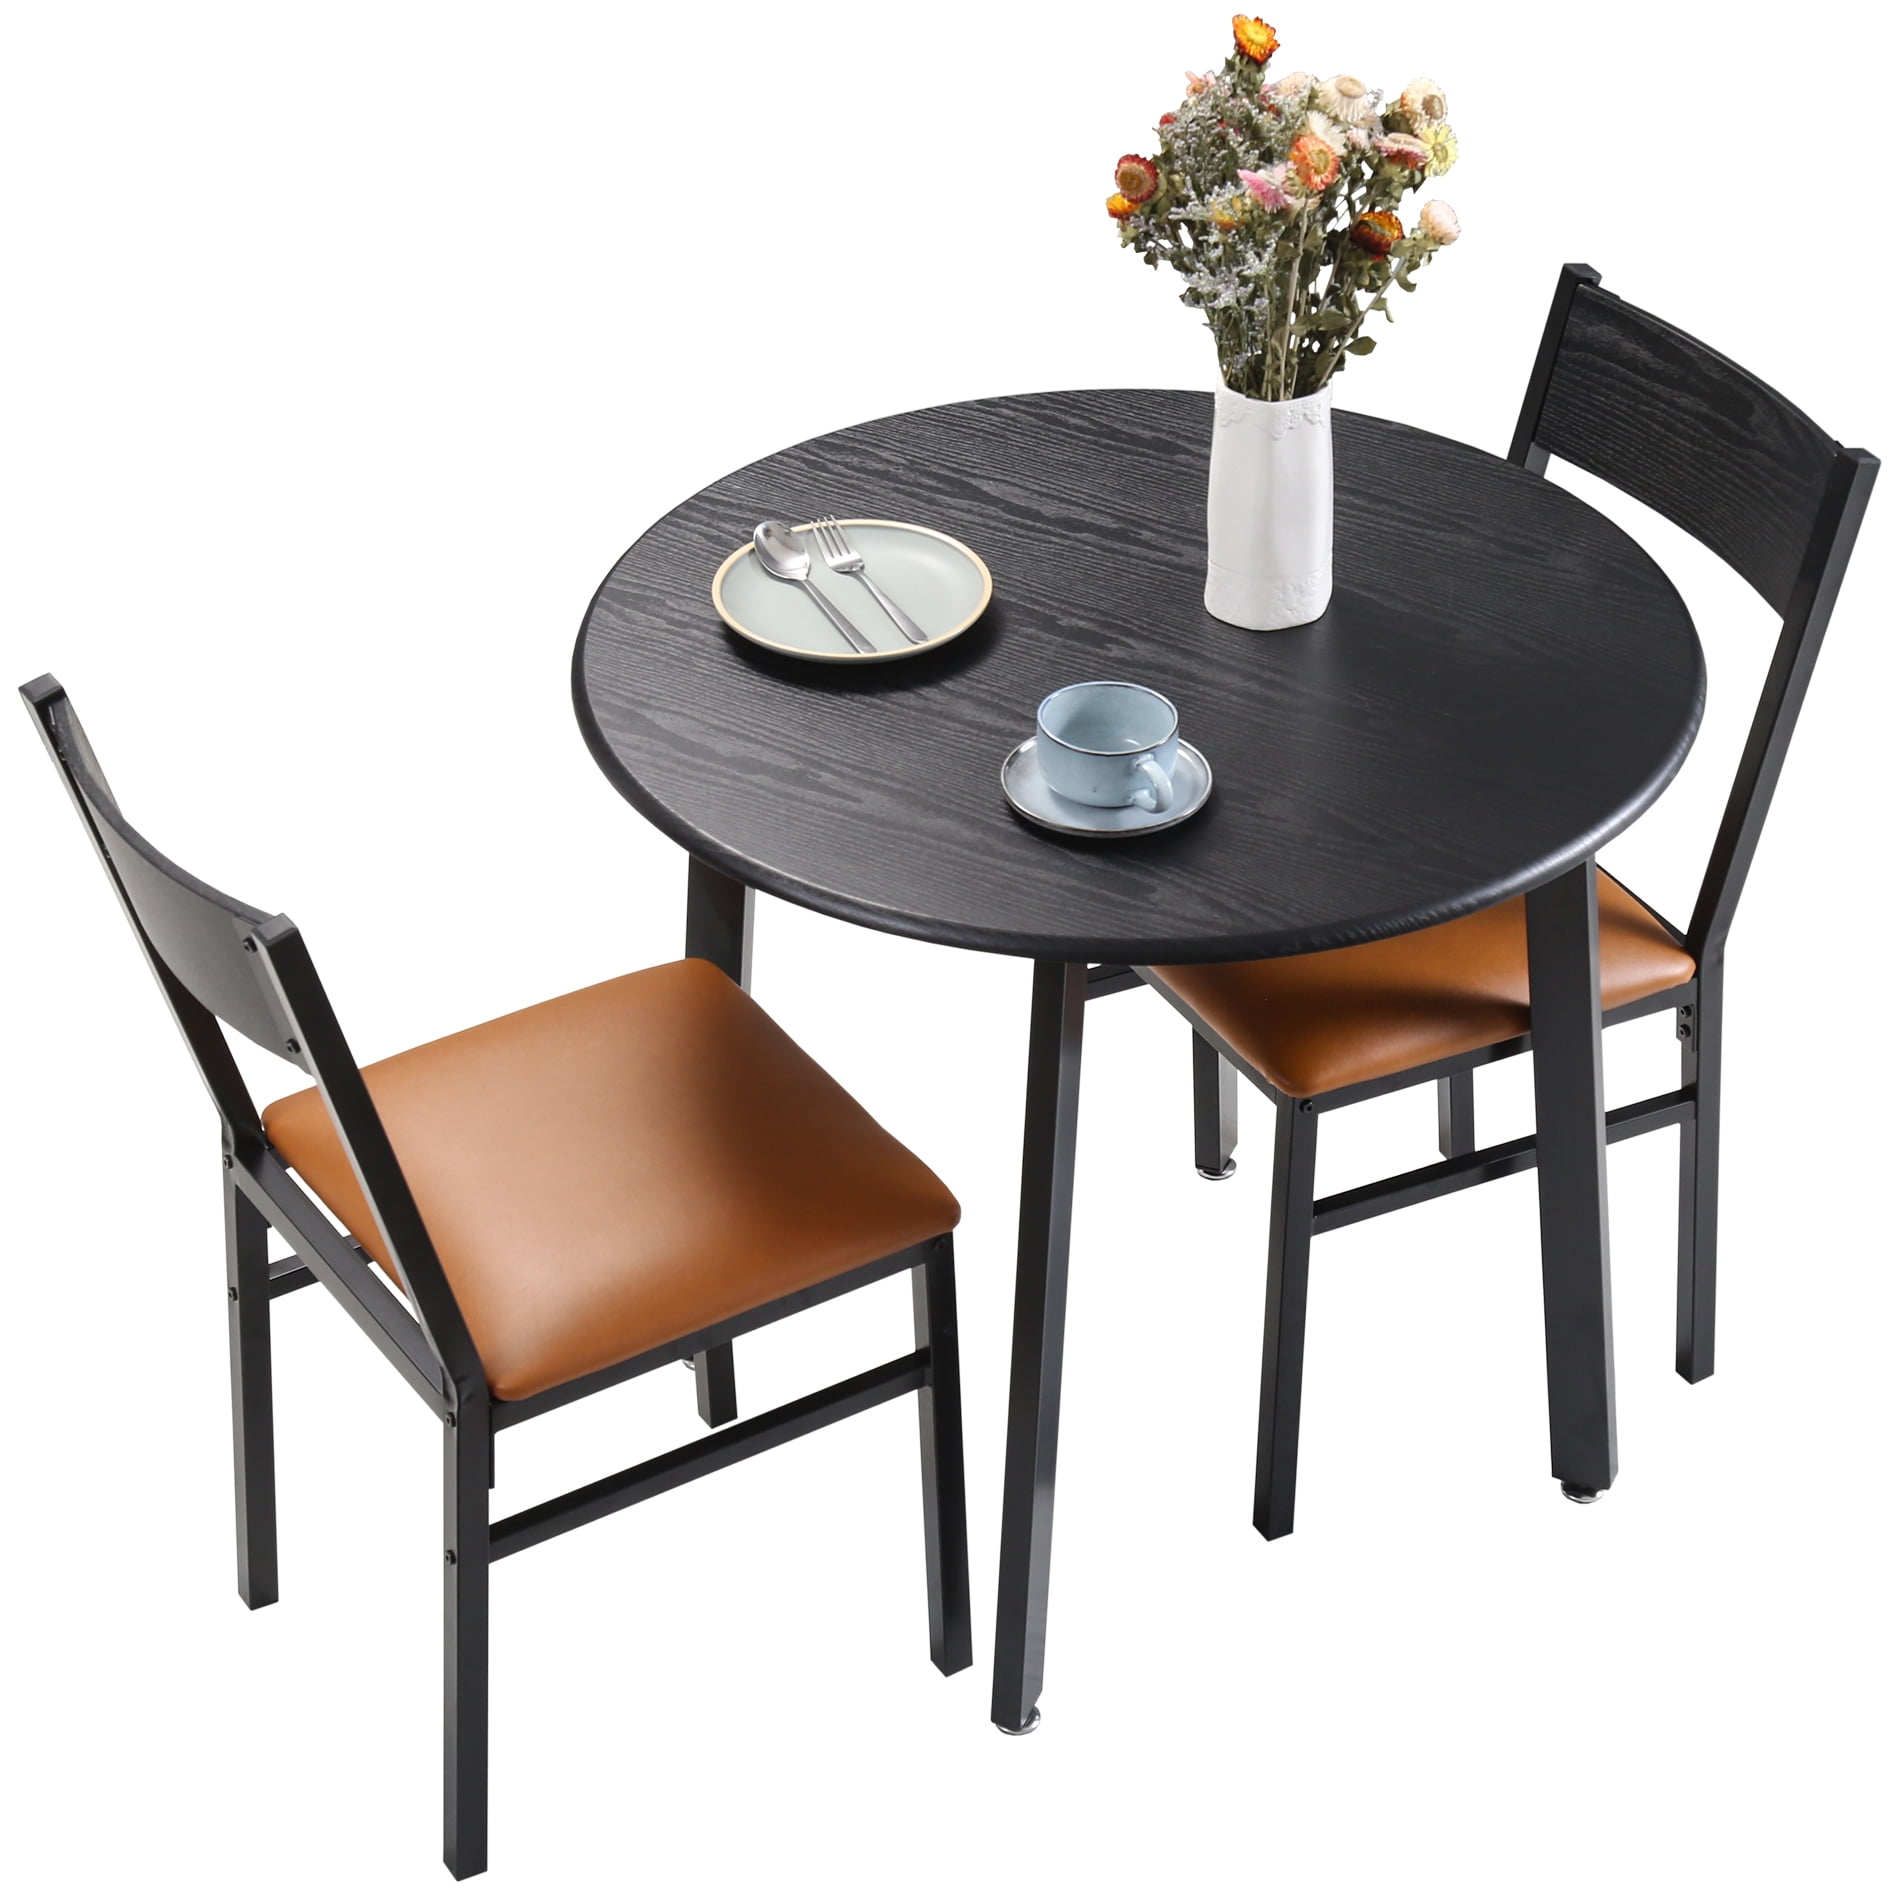 3 Piece Round Dining Table Set With, Is Round Table Good For Small Spaces